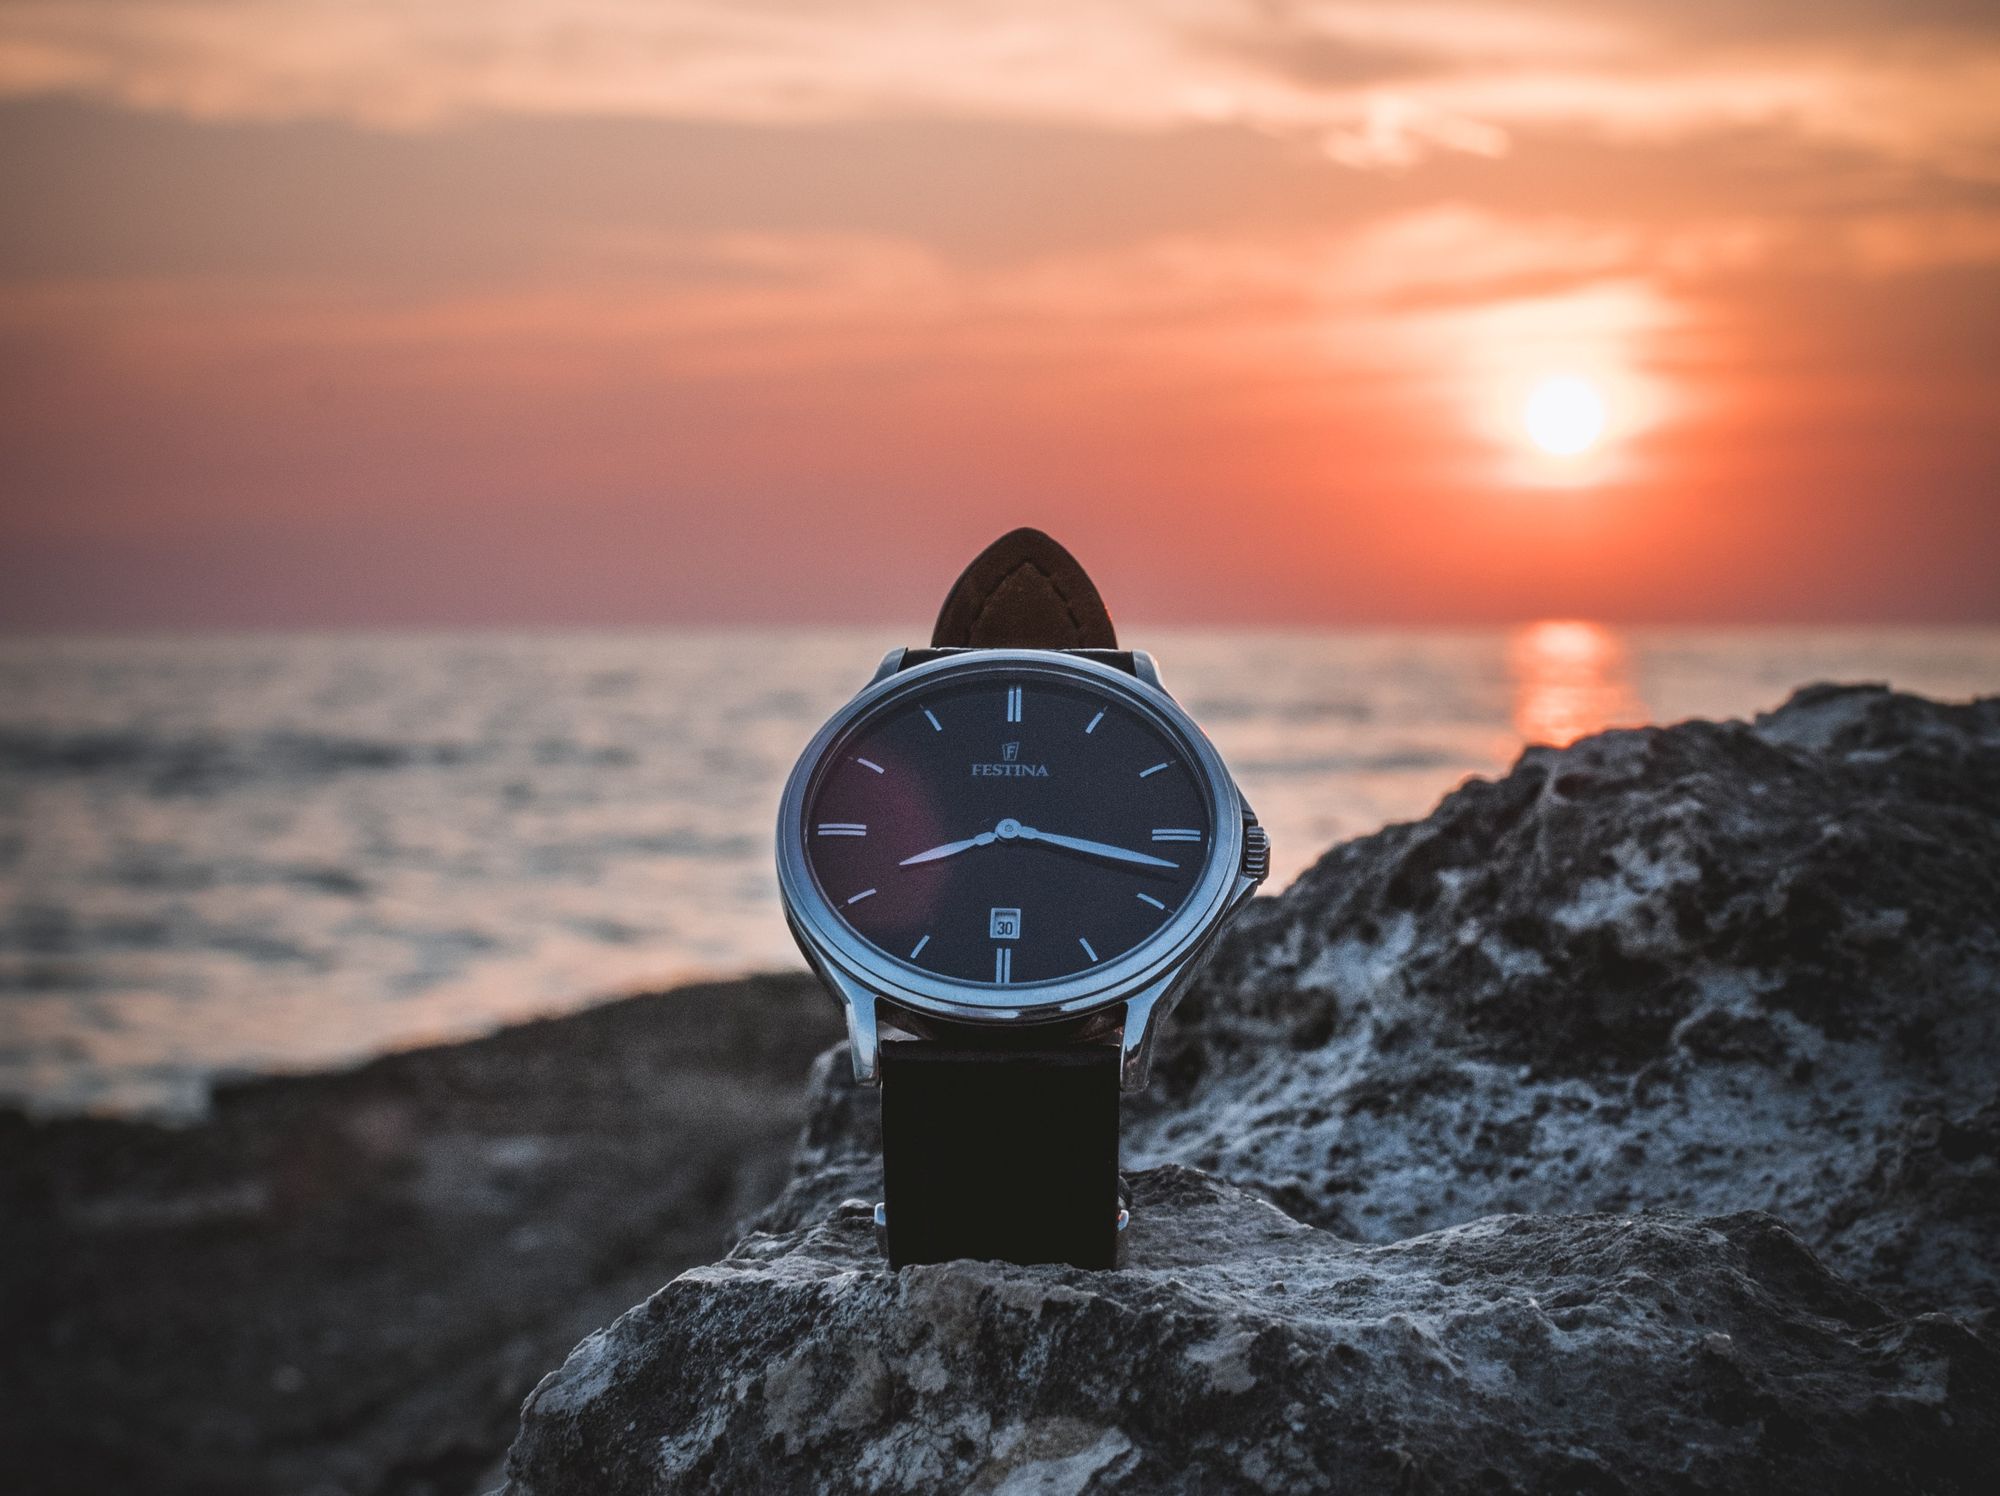 Picture of a watch sitting on a rock on the beach during the sunset